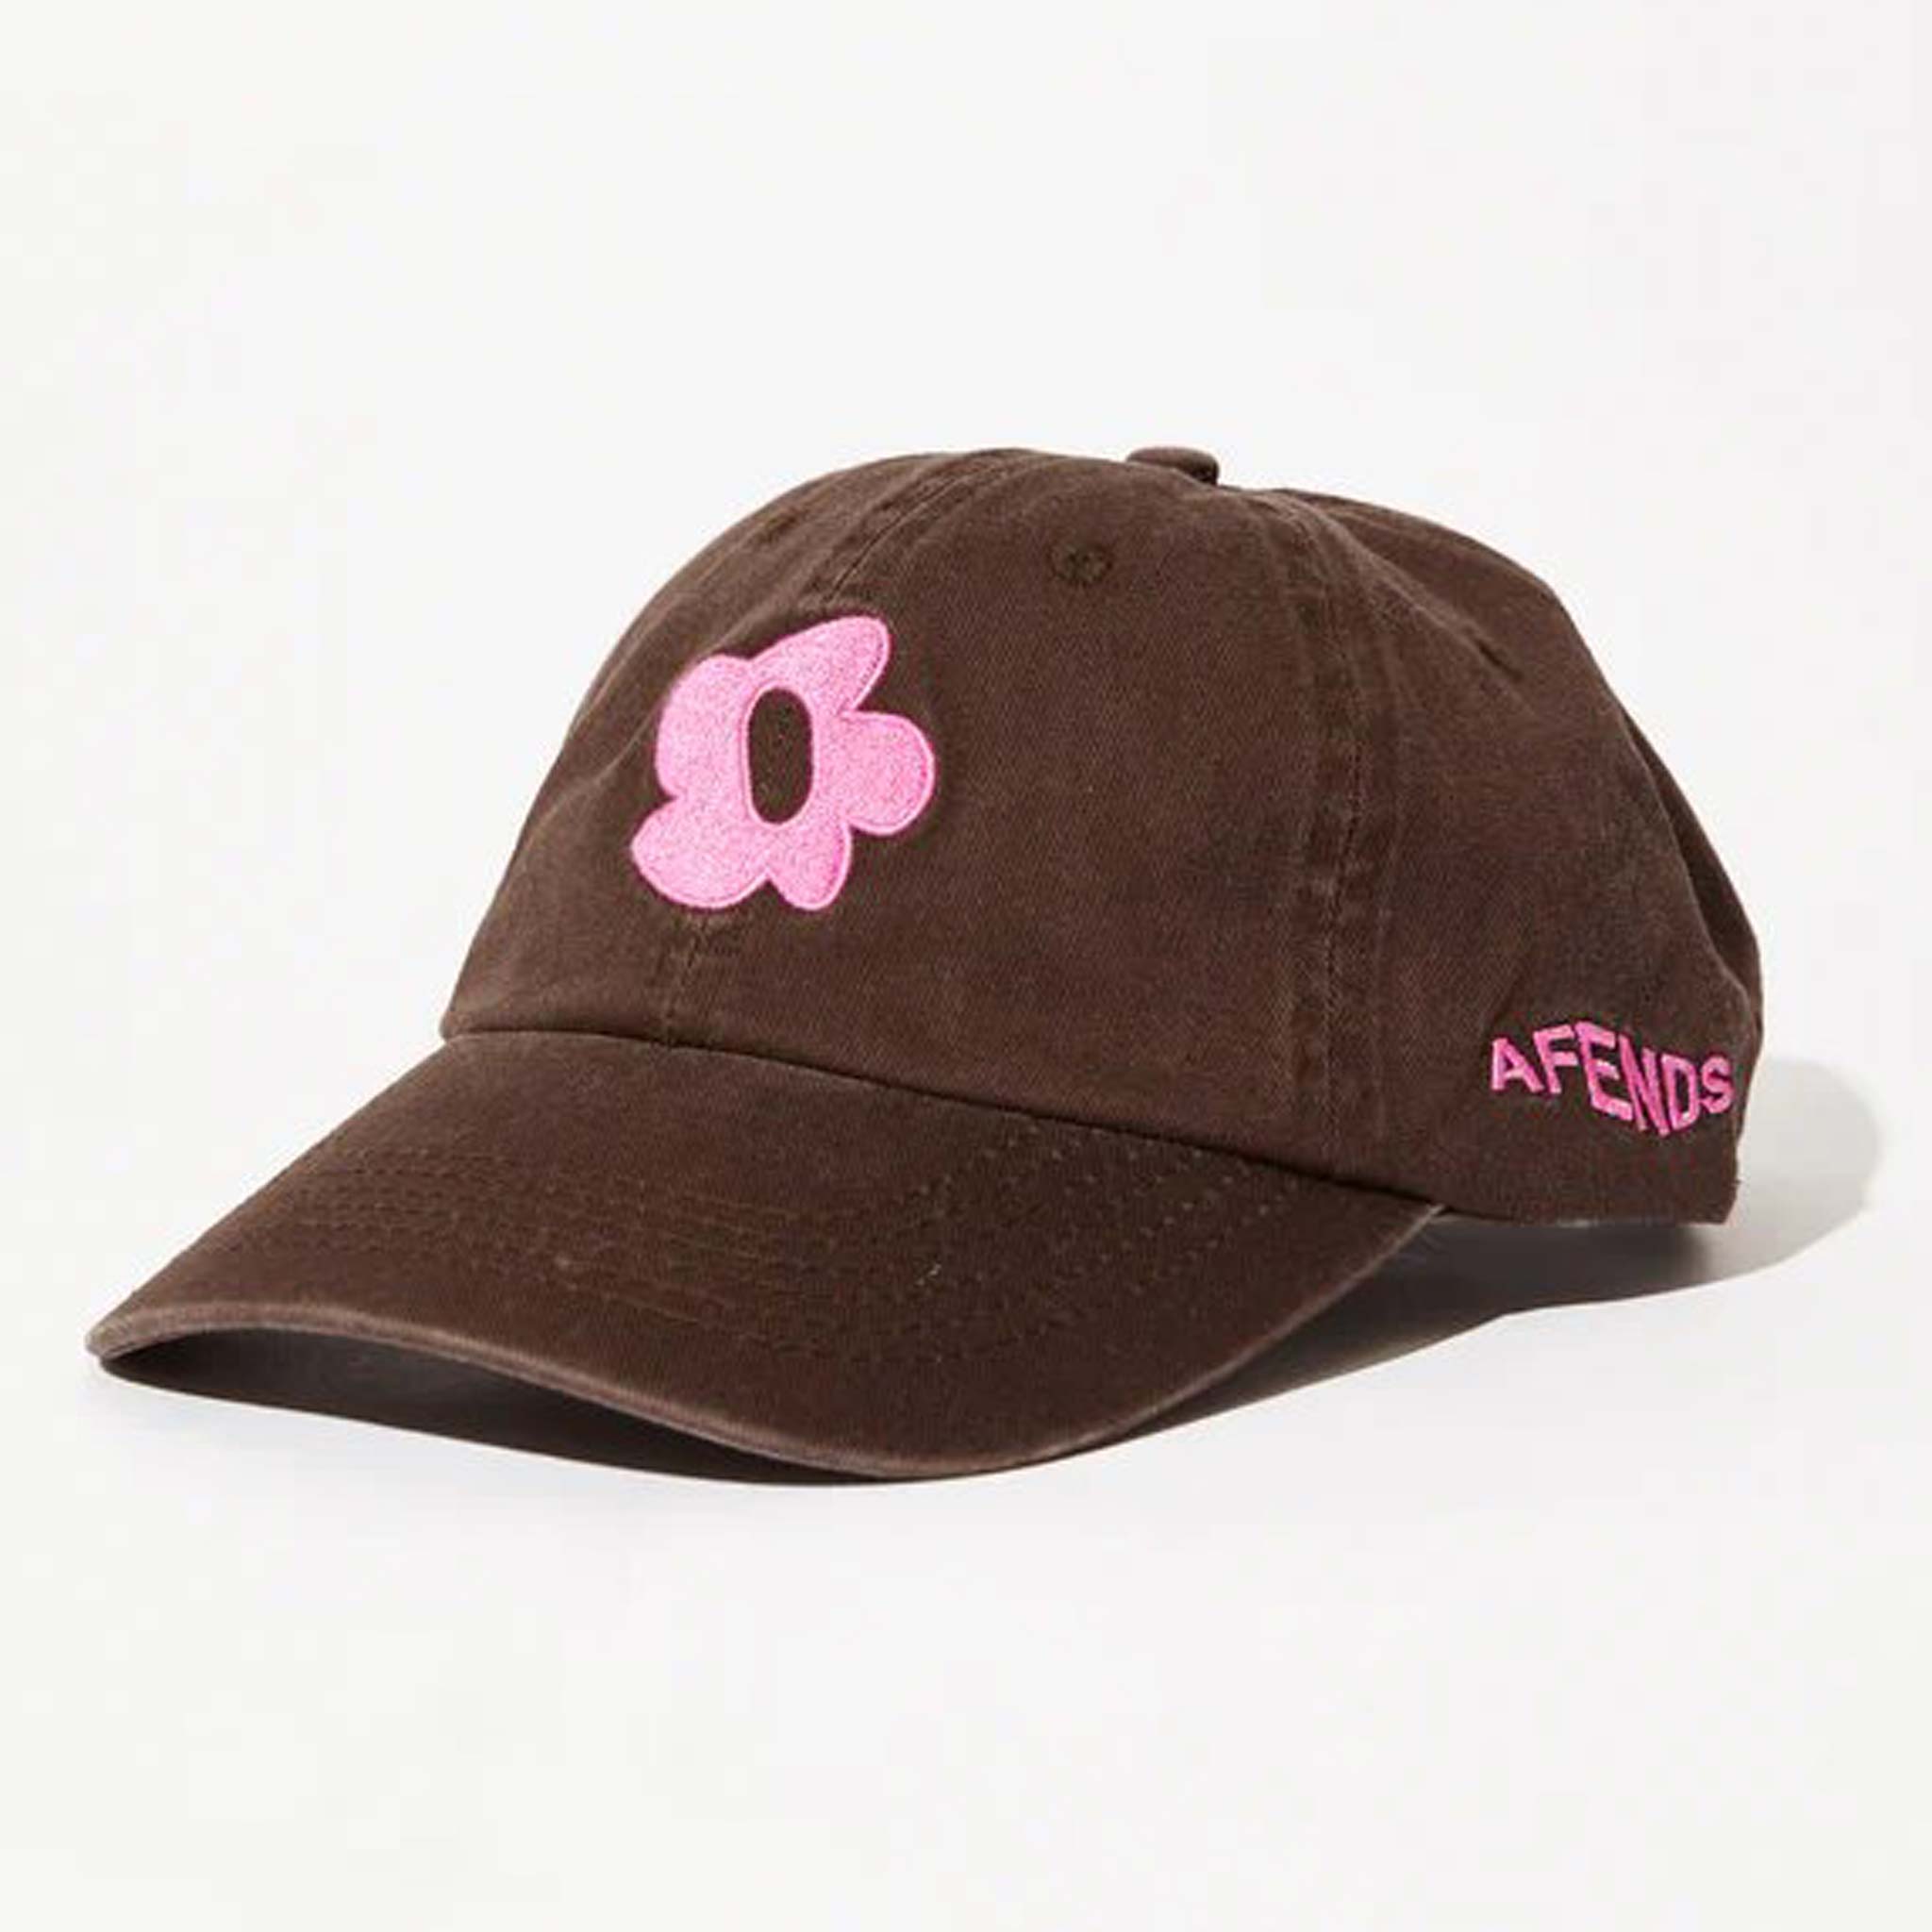 Alohaz Recycled Panelled Cap